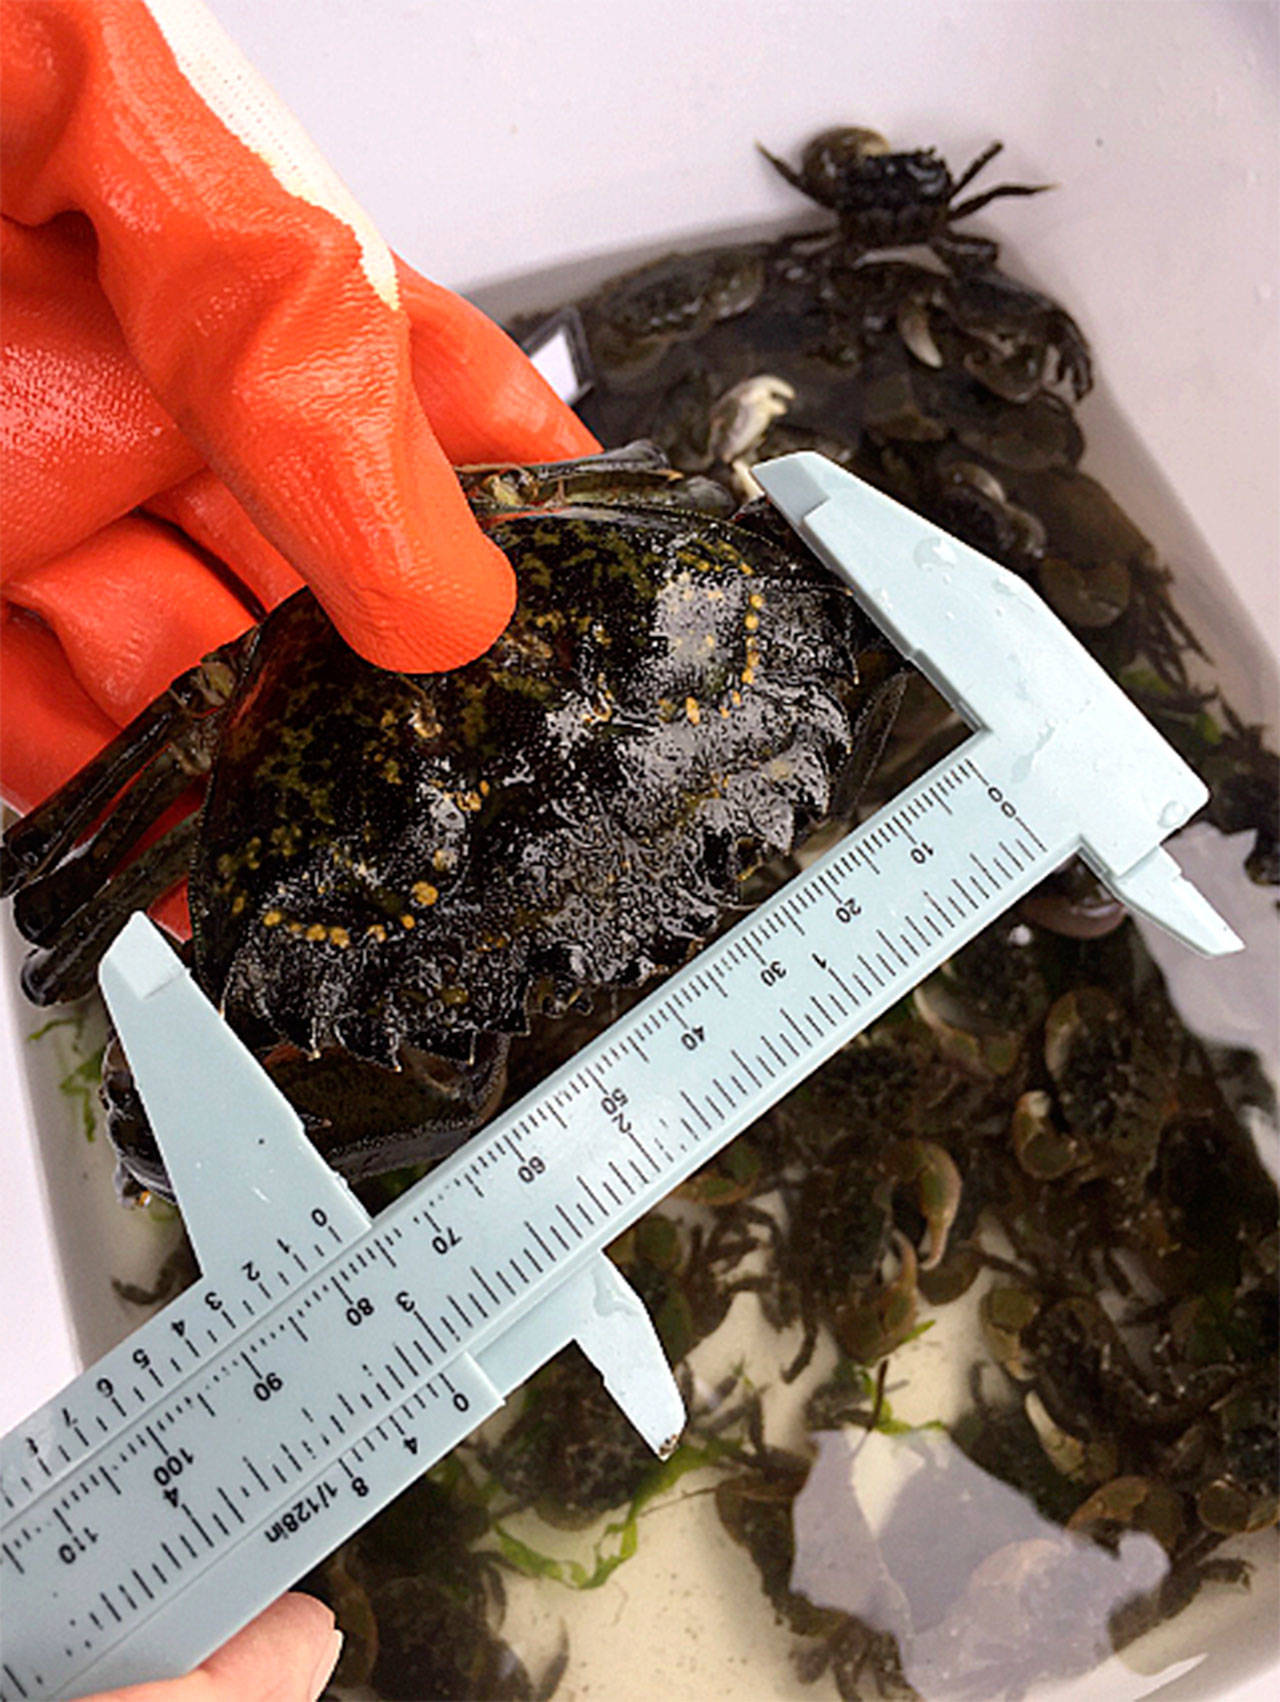 Jefferson County’s first European green crab was captured on Sept. 8 on Kala Point near Port Townsend. The male crab measured 77-millimeters and subsequent trapping nearby on Scow Bay between Indian and Marrowstone Islands recovered a second green crab. Photo by W. Feltham/C. Jones